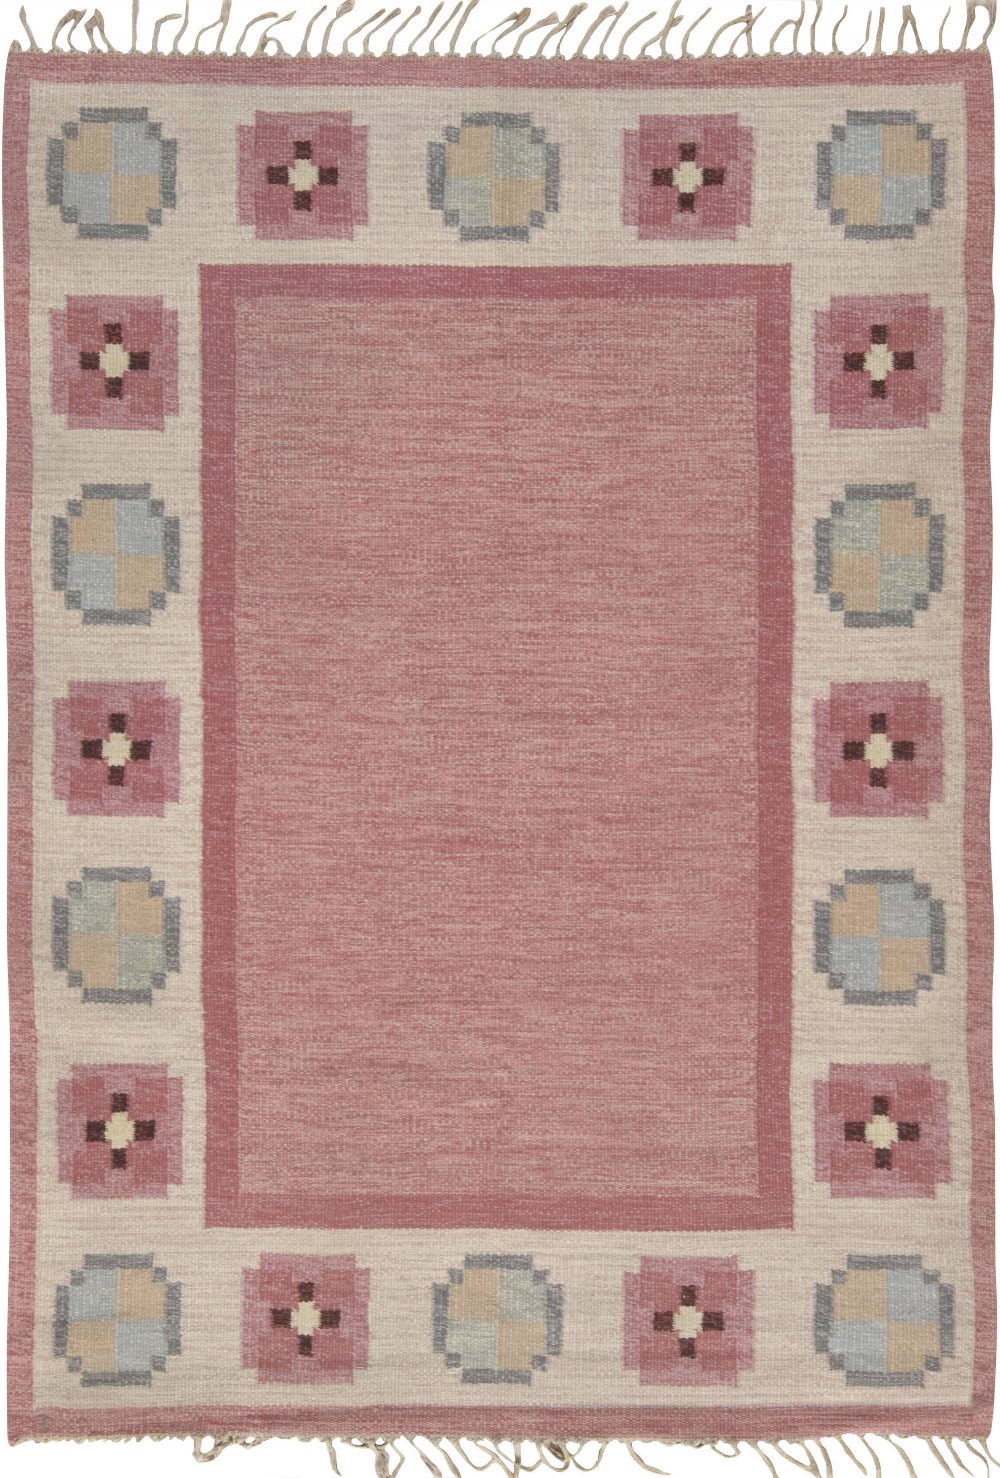 Midcentury Swedish Pink, Blue and Gray Flat-Weave Wool Rug BB6578